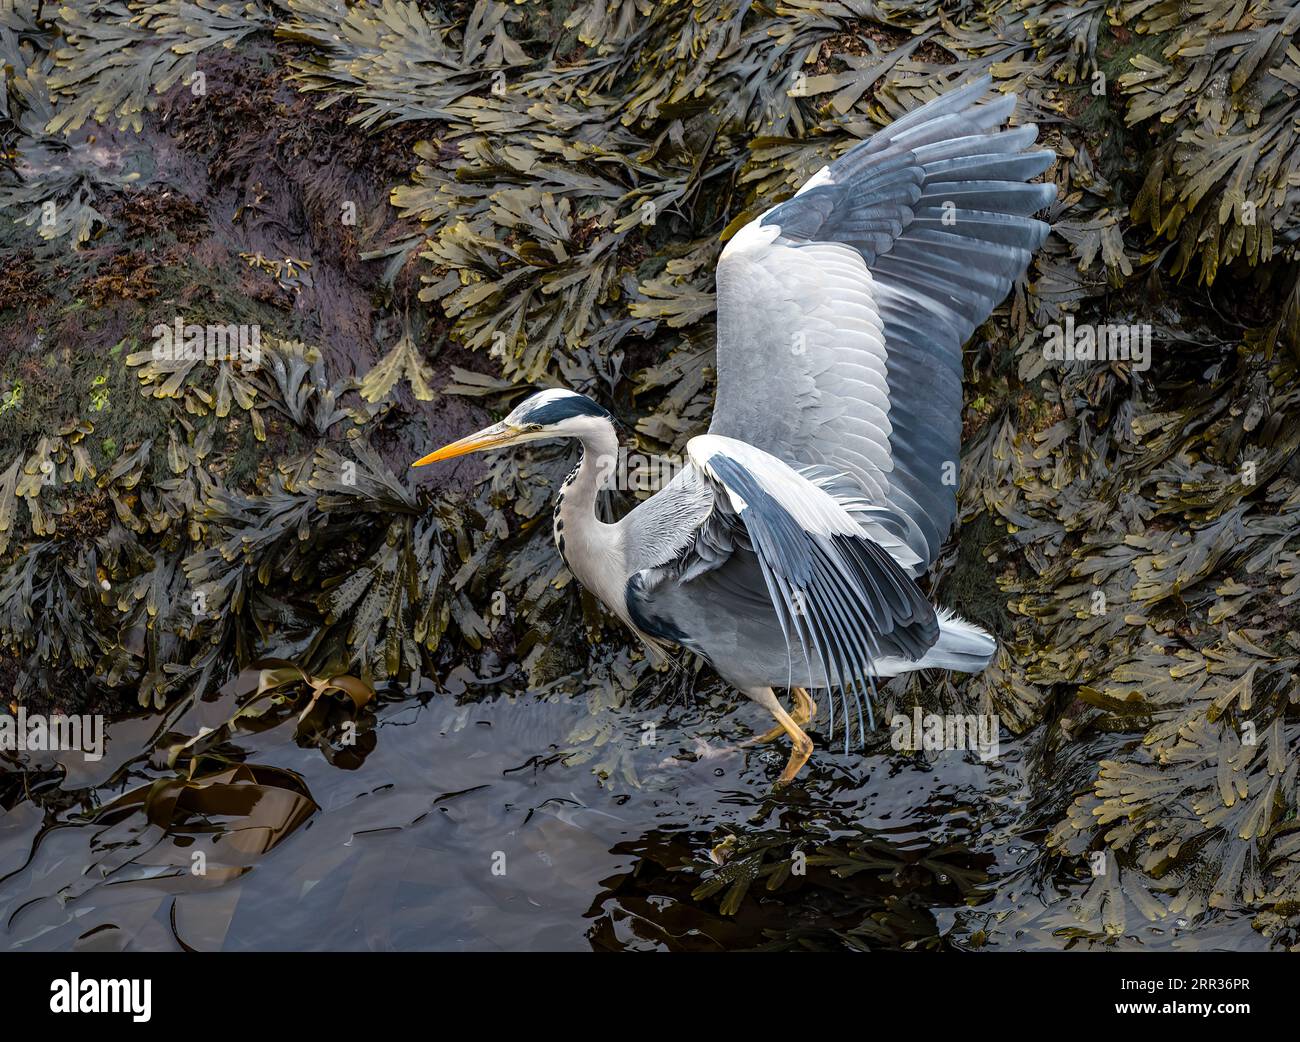 Grey heron  Ardea cinerea) wading in seaweed flapping wings at low tide on rocky shore,Scotland, UK Stock Photo